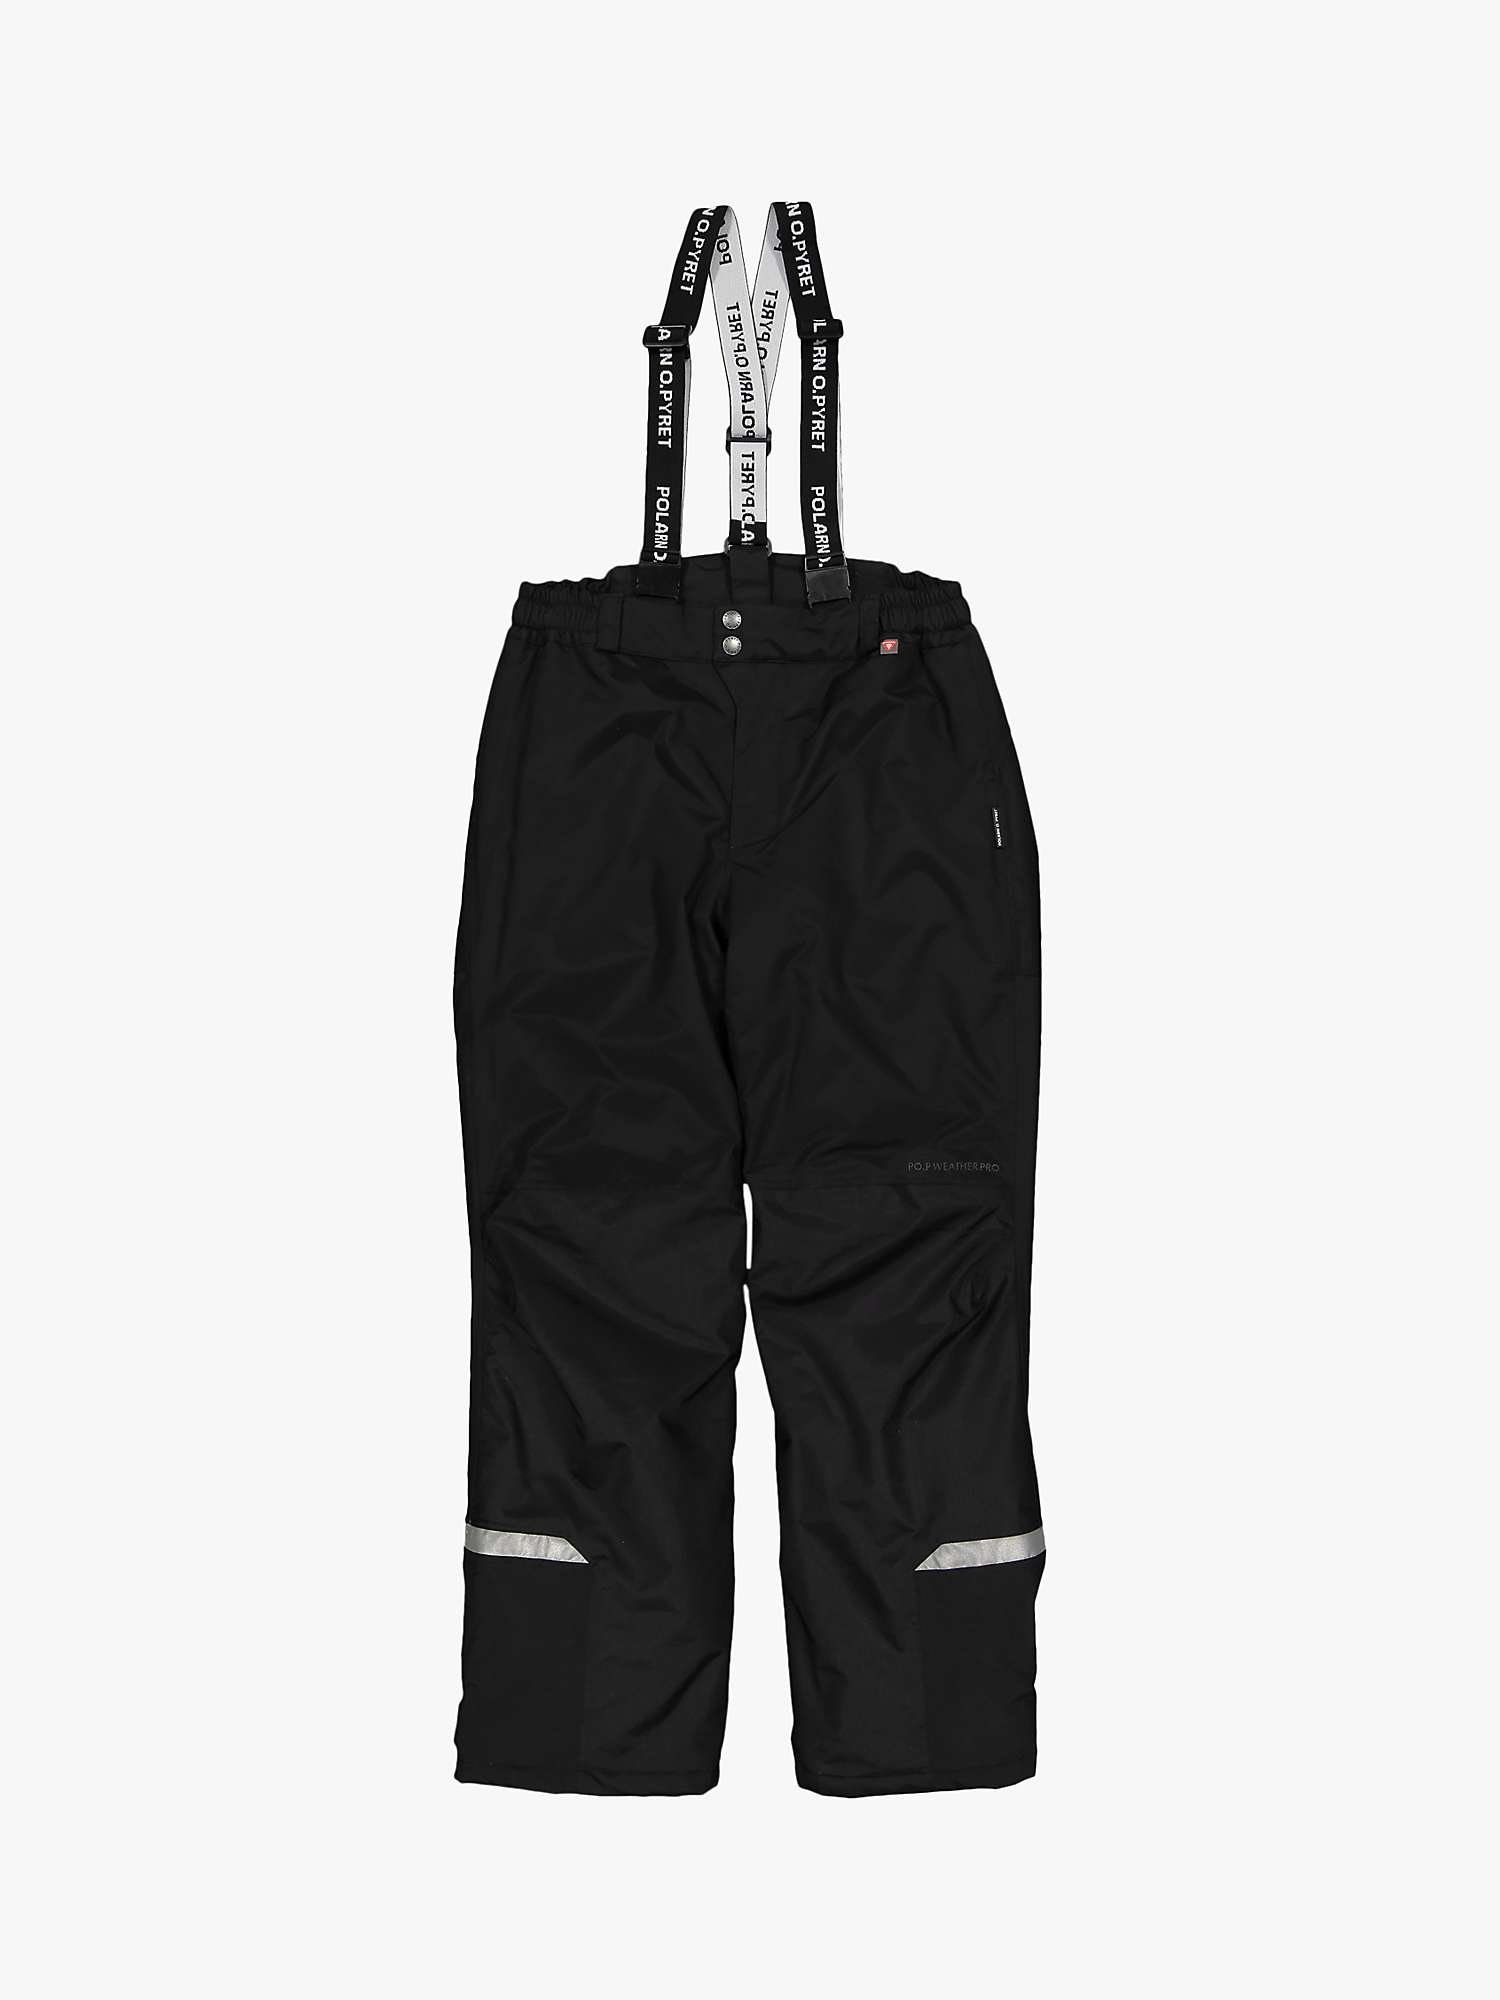 Buy Polarn O. Pyret Kids' Padded Wind & Waterproof Shell Trousers, Black Online at johnlewis.com